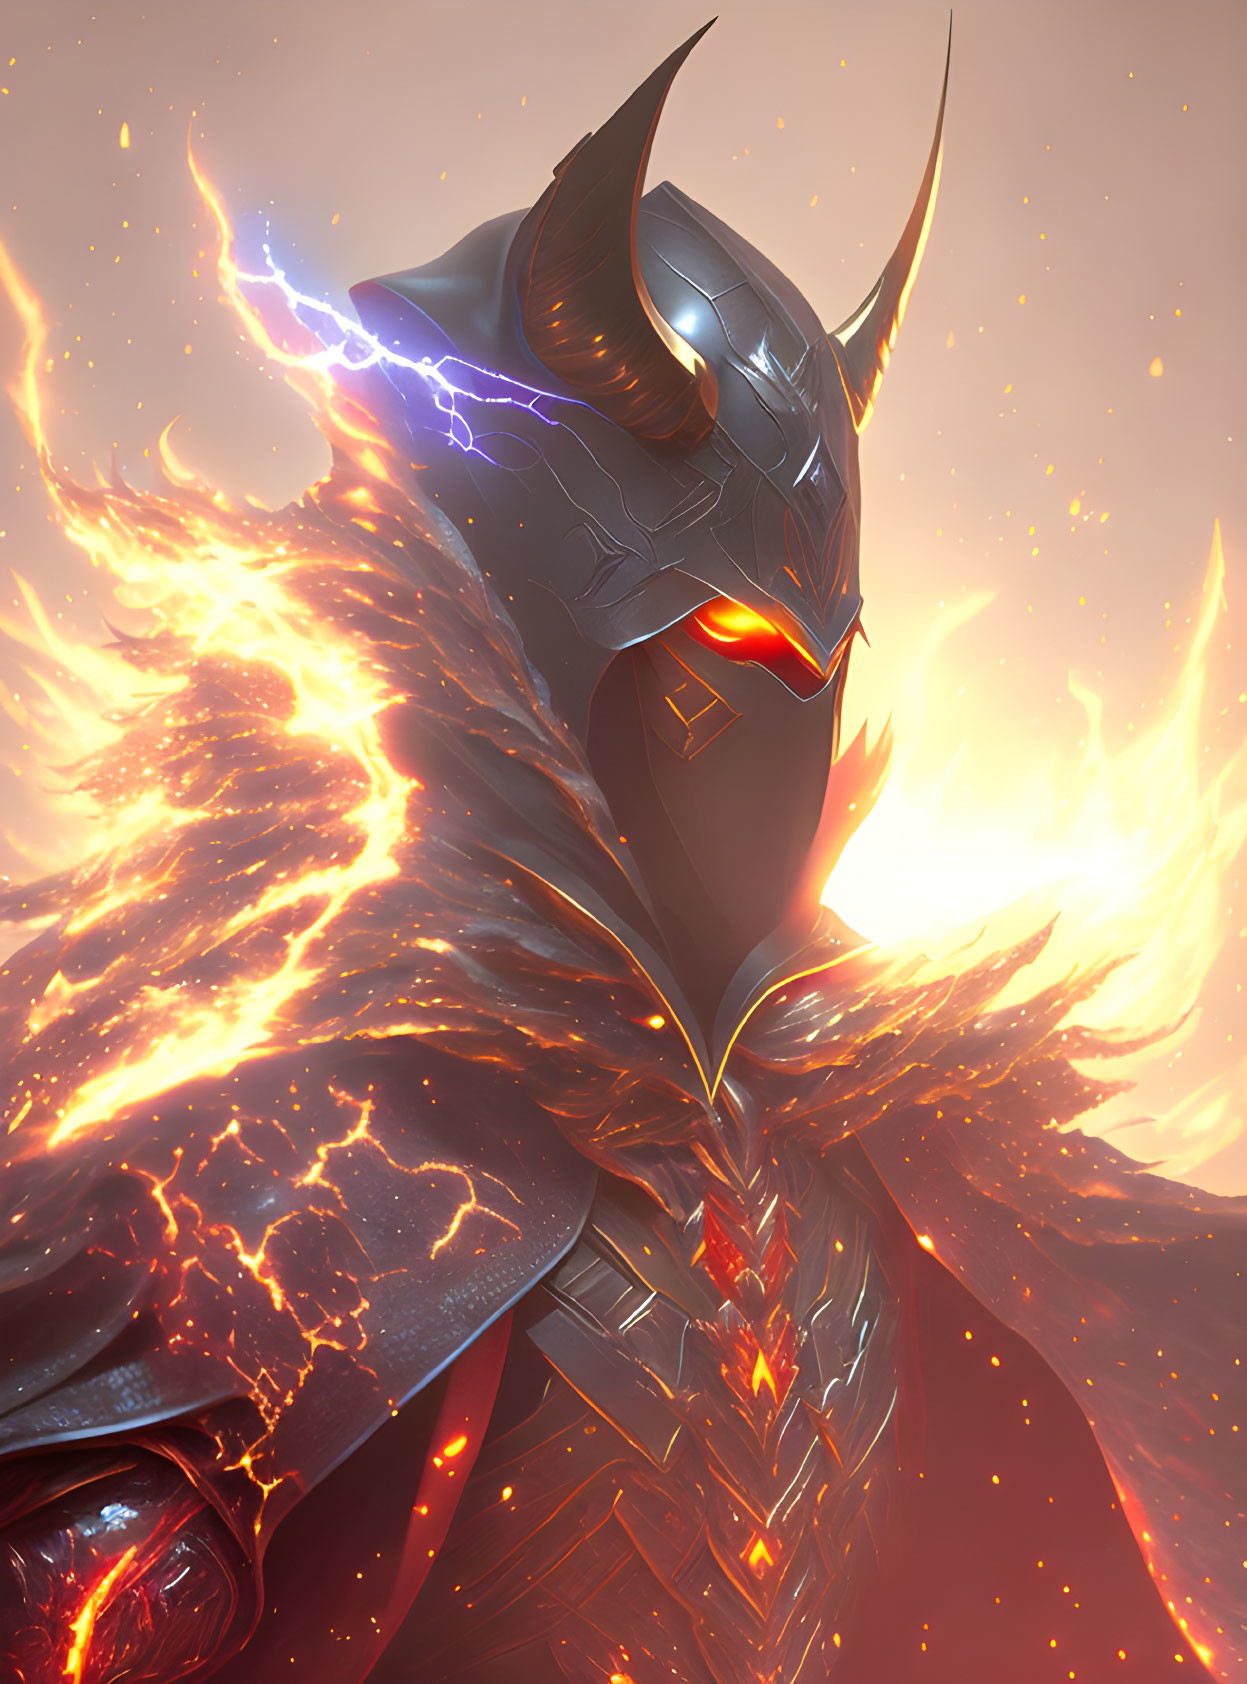 Illustration of armored figure with glowing red eyes engulfed in flames